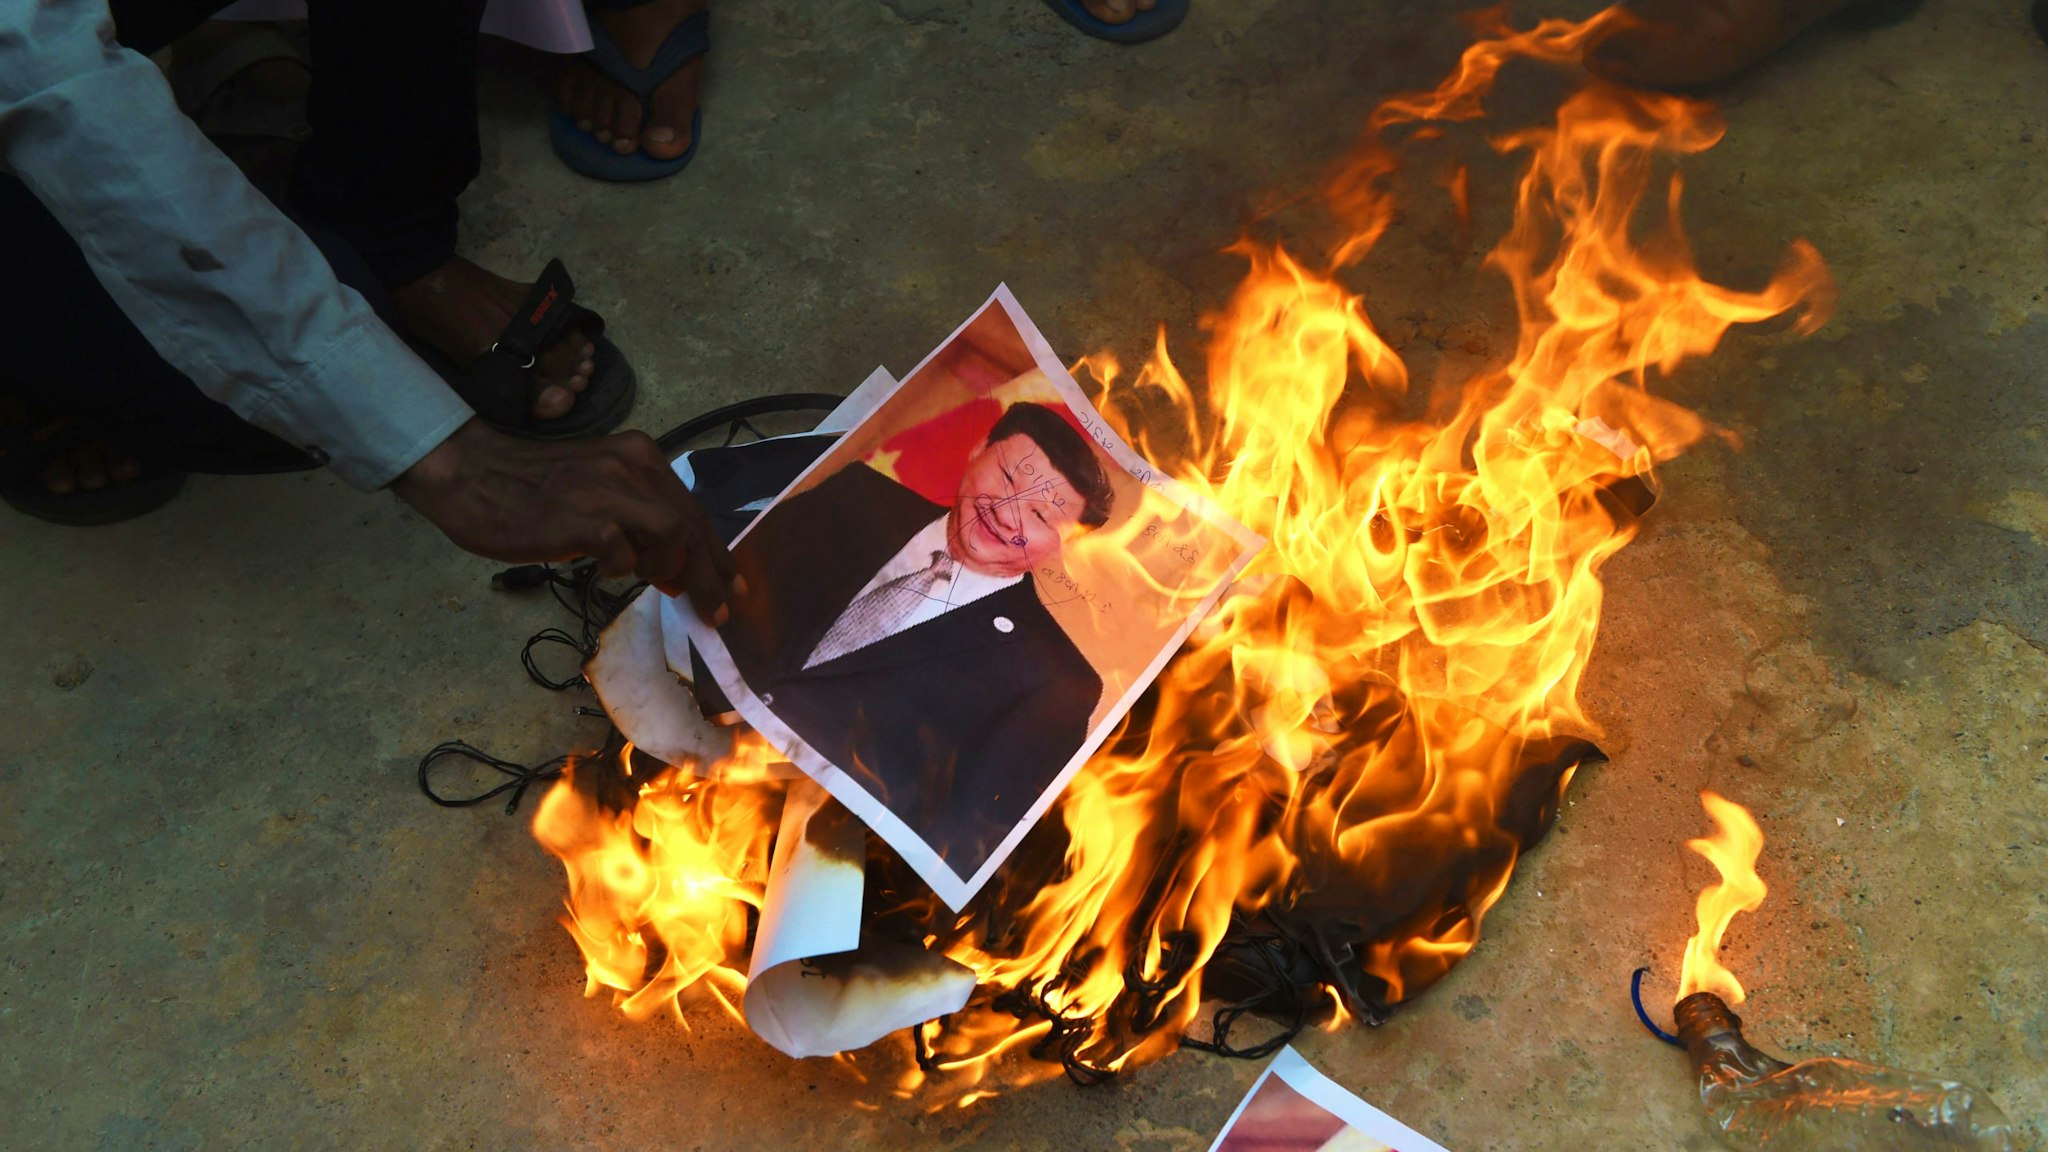 Members of the non-governmental organisation MADADGAAR PARIVAR, burn a poster of Chinese President Xi Jinping along with Chinese items as they protest against the killing of the three Indian soldiers by Chinese troops, in Ahmedabad on June 16, 2020. - Three Indian soldiers were killed in a violent face-off on the Chinese border, the Indian army said June 16, following weeks of rising tensions and the deployment of thousands of extra troops from both sides.